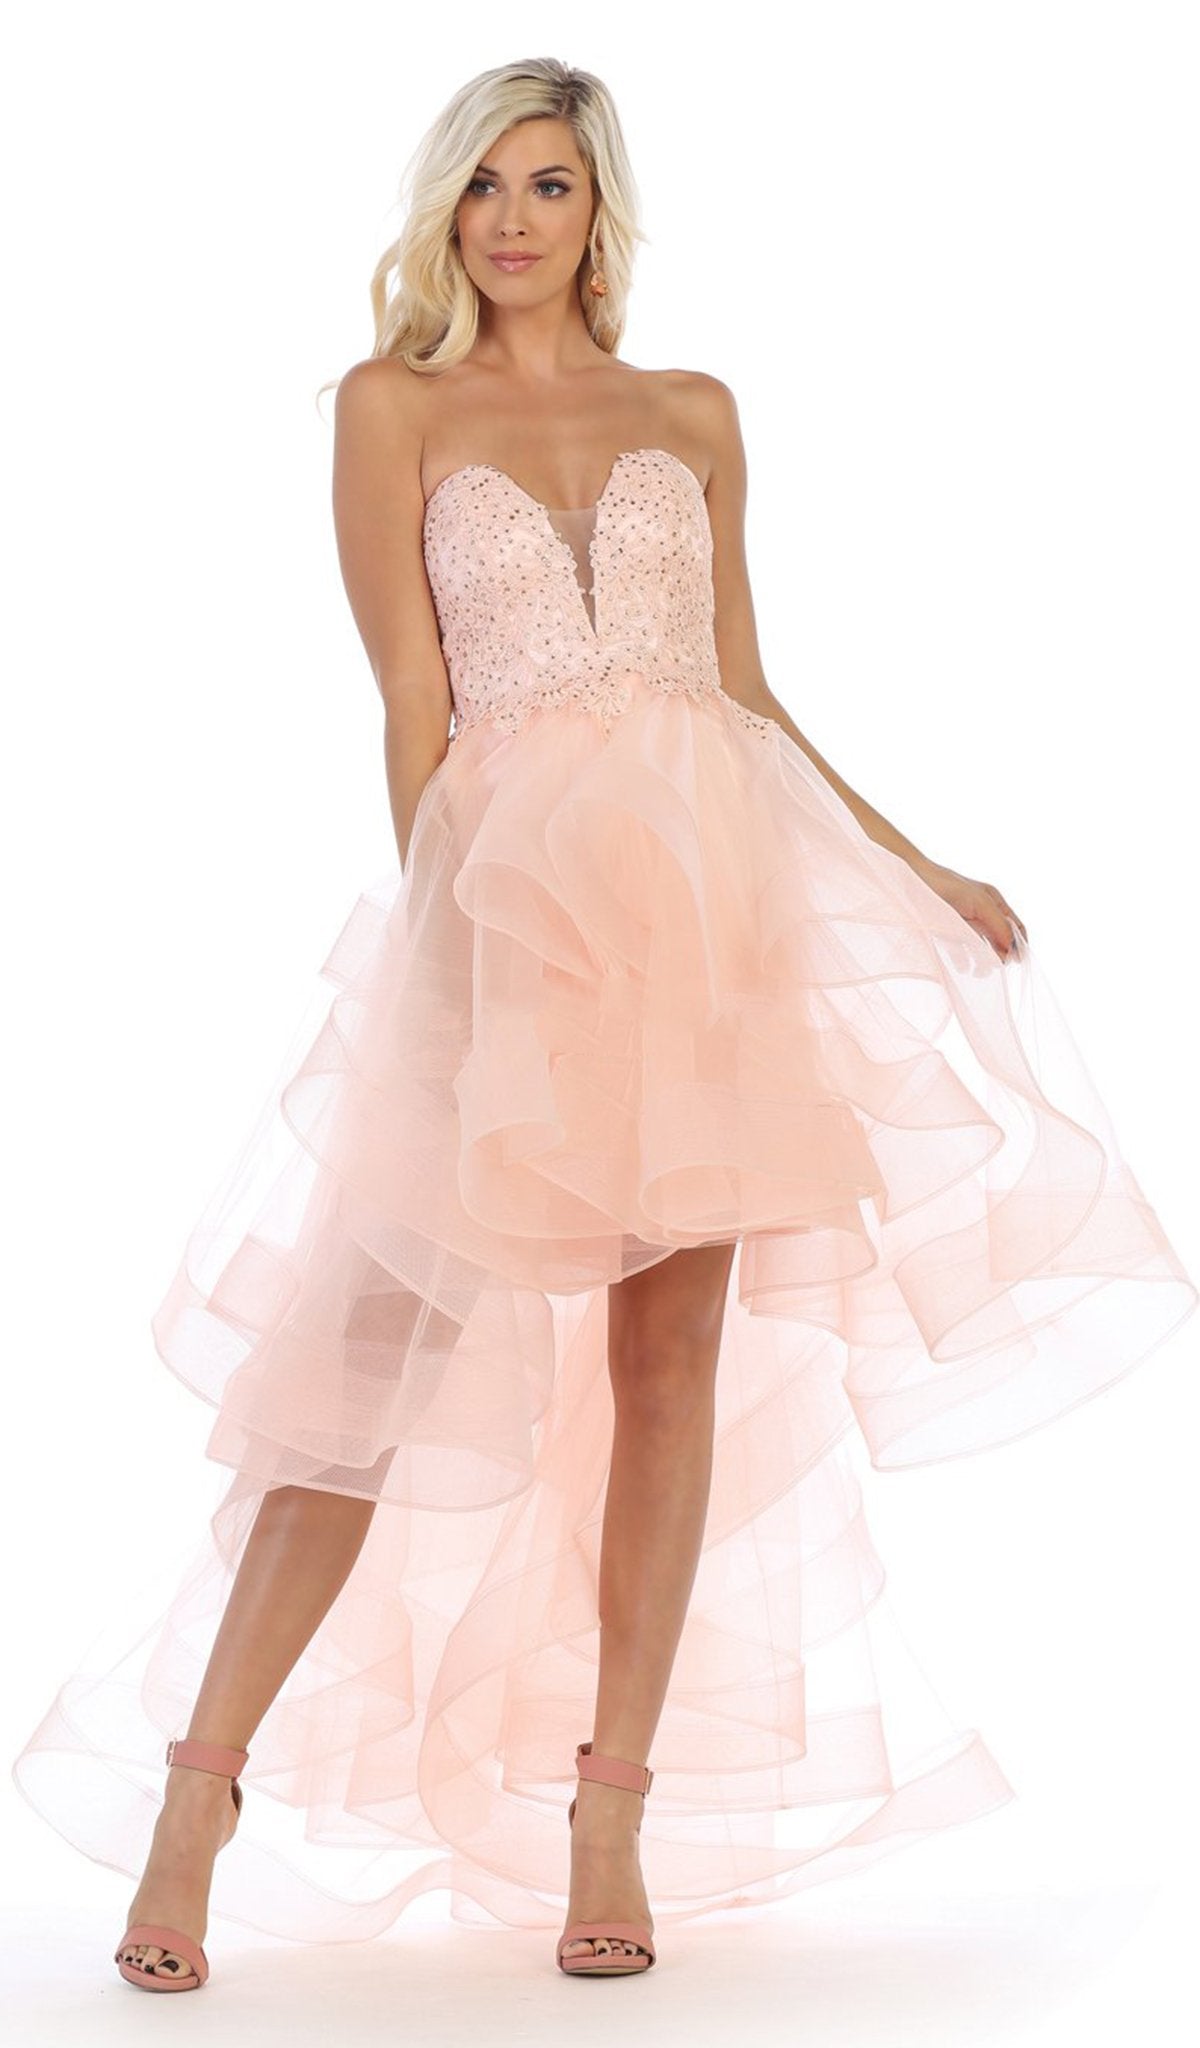 May Queen - RQ7716 Strapless Lace Appliqued High Low Gown In Pink